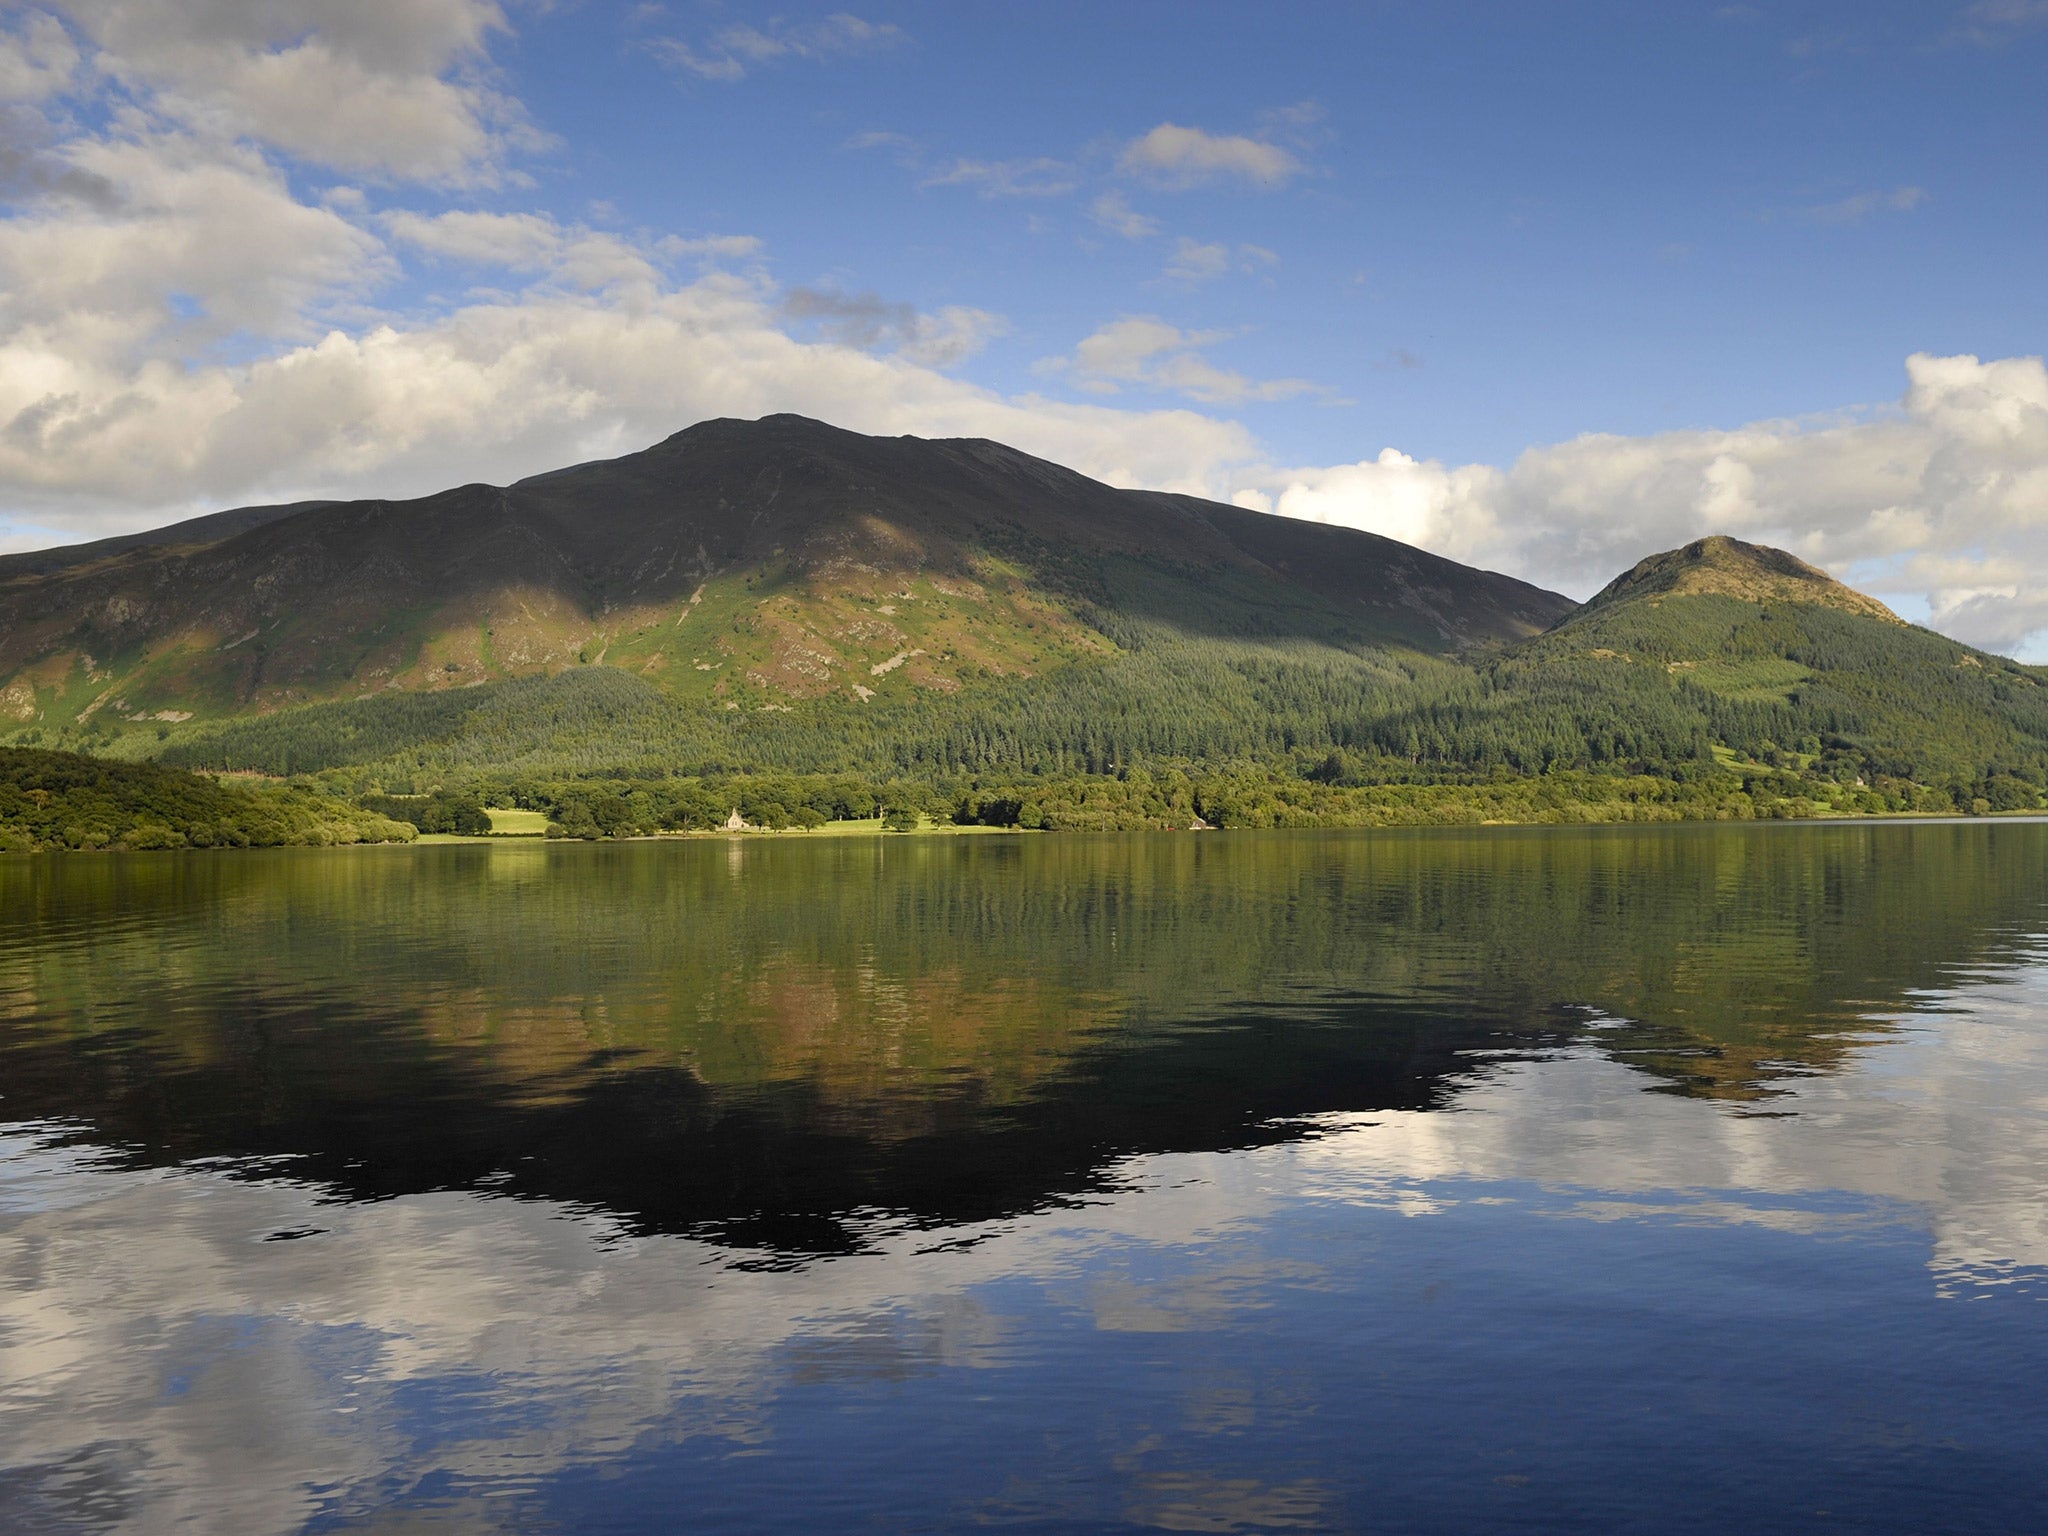 The vendace was rediscovered at Bassenthwaite Lake